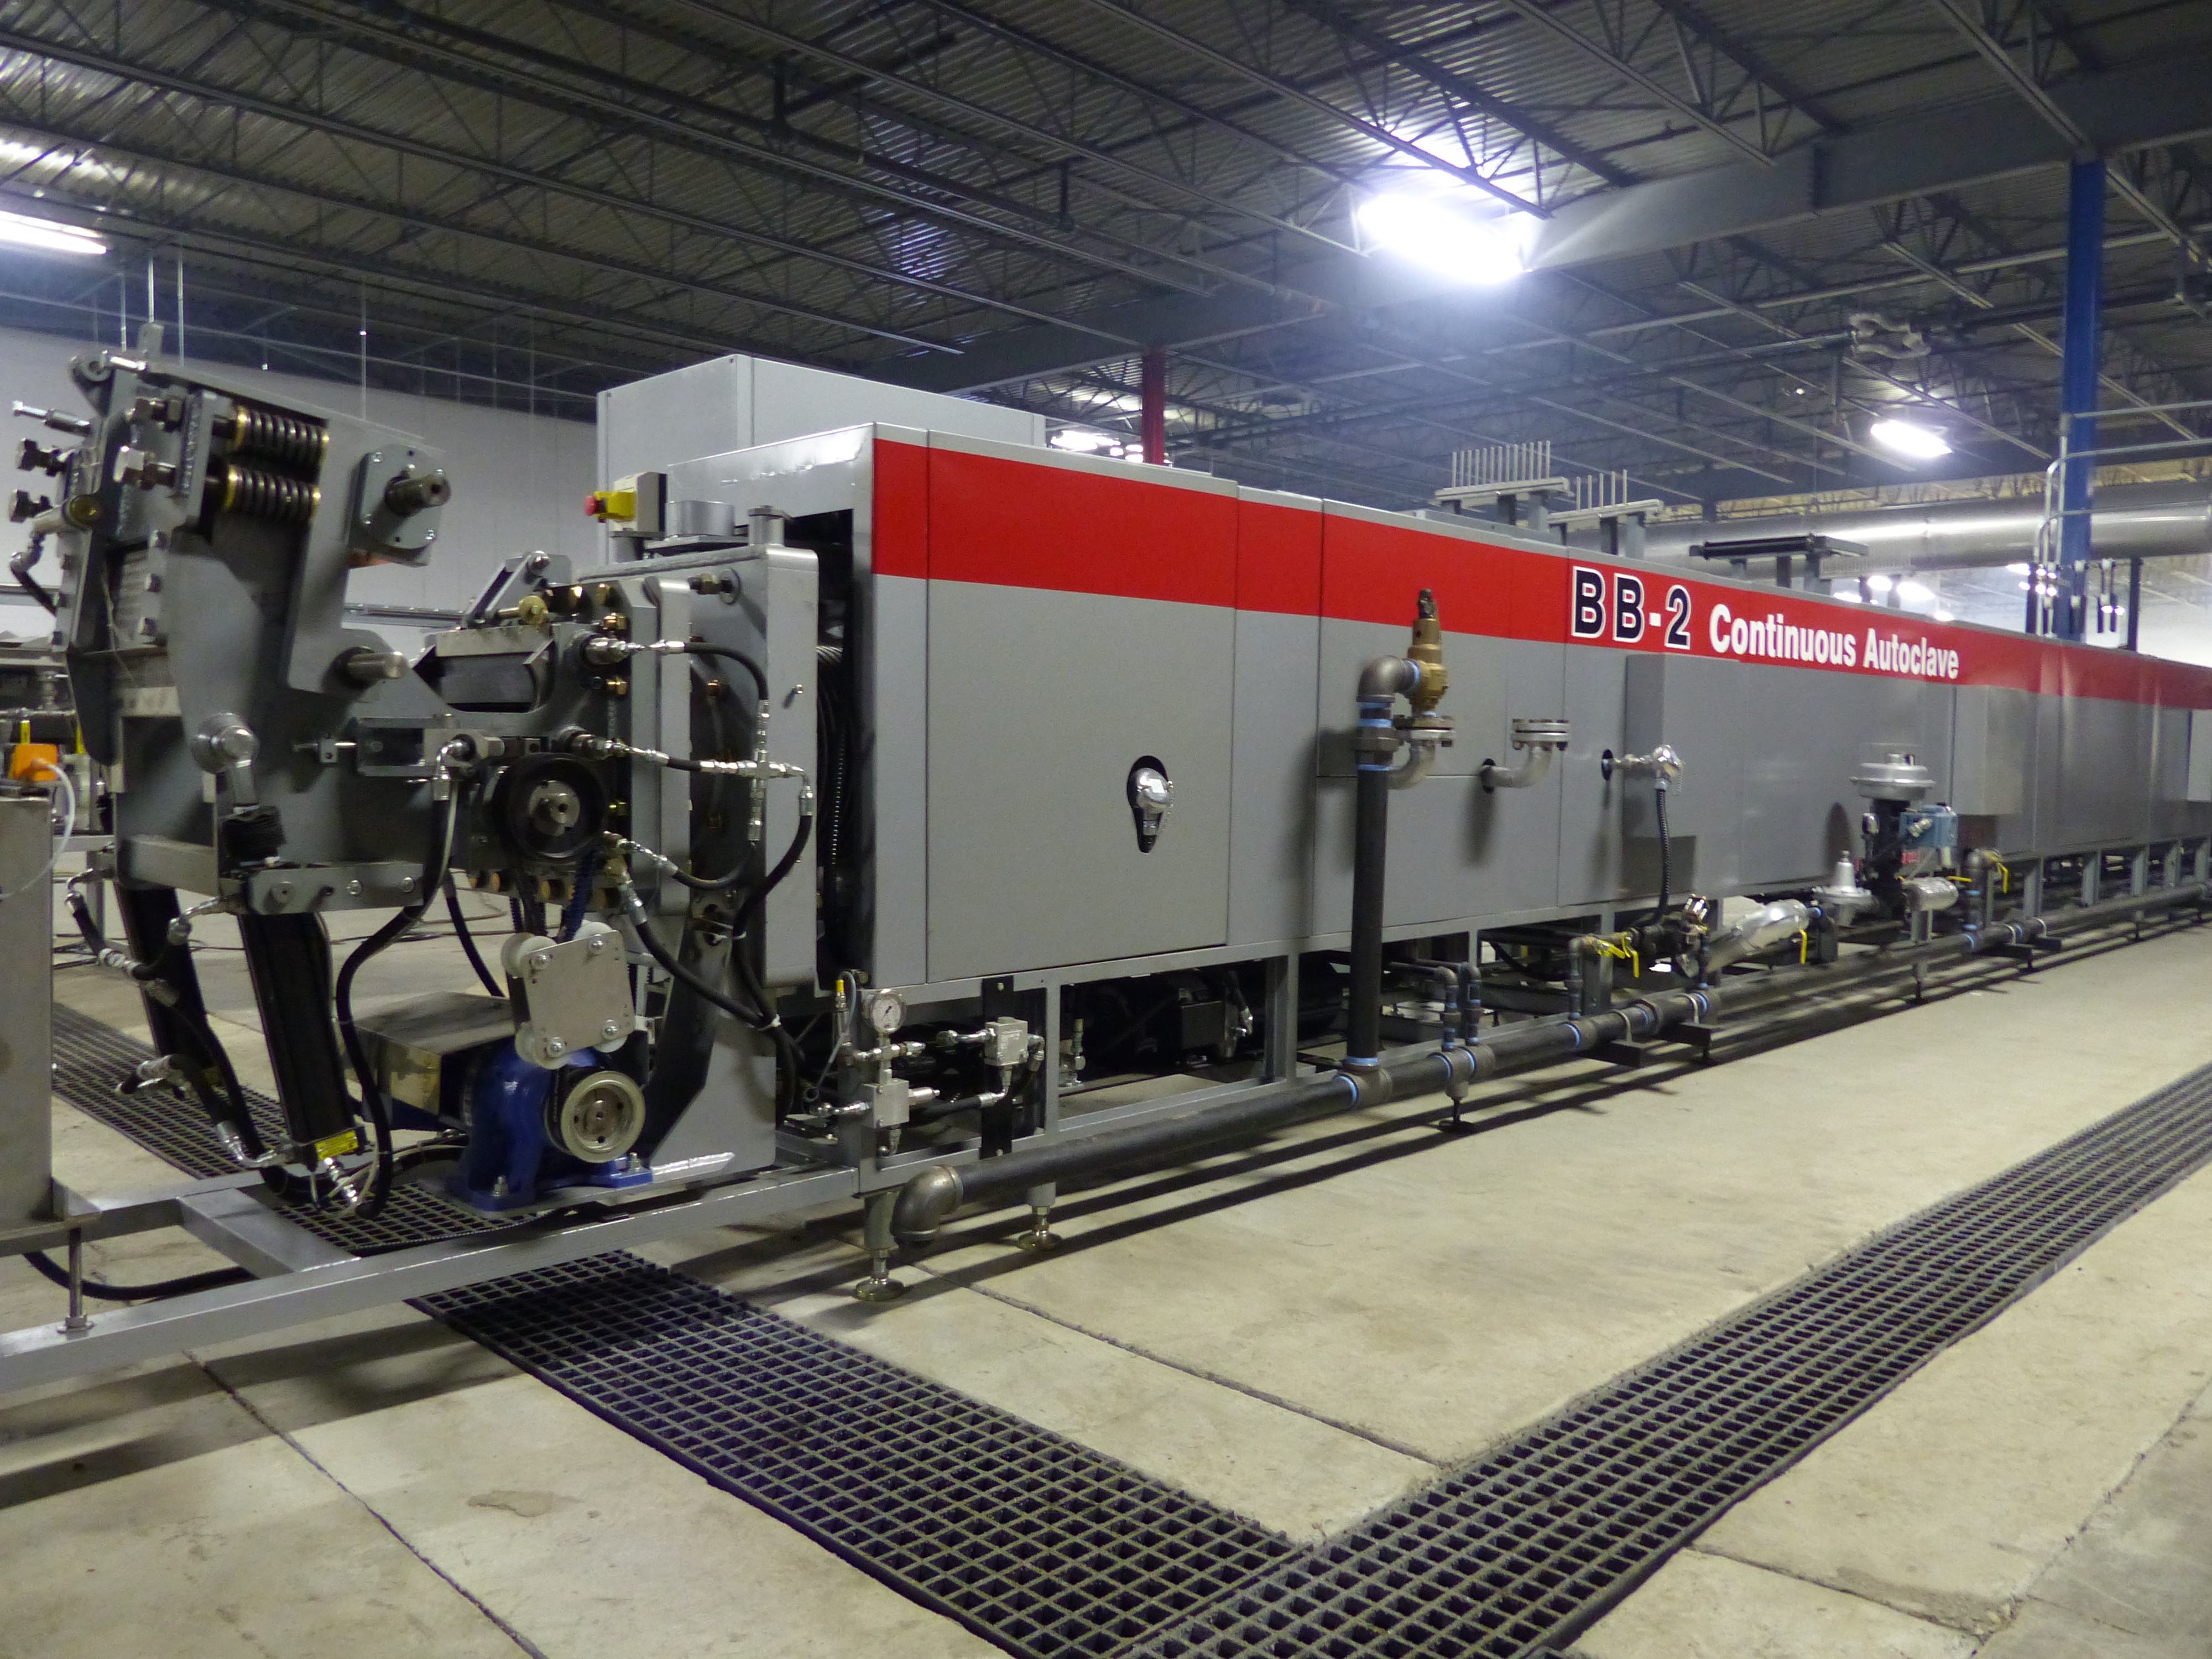 The new space dye equipment made by Belmont Textile Machinery now online at Pharr's McAdenville, NC operations.